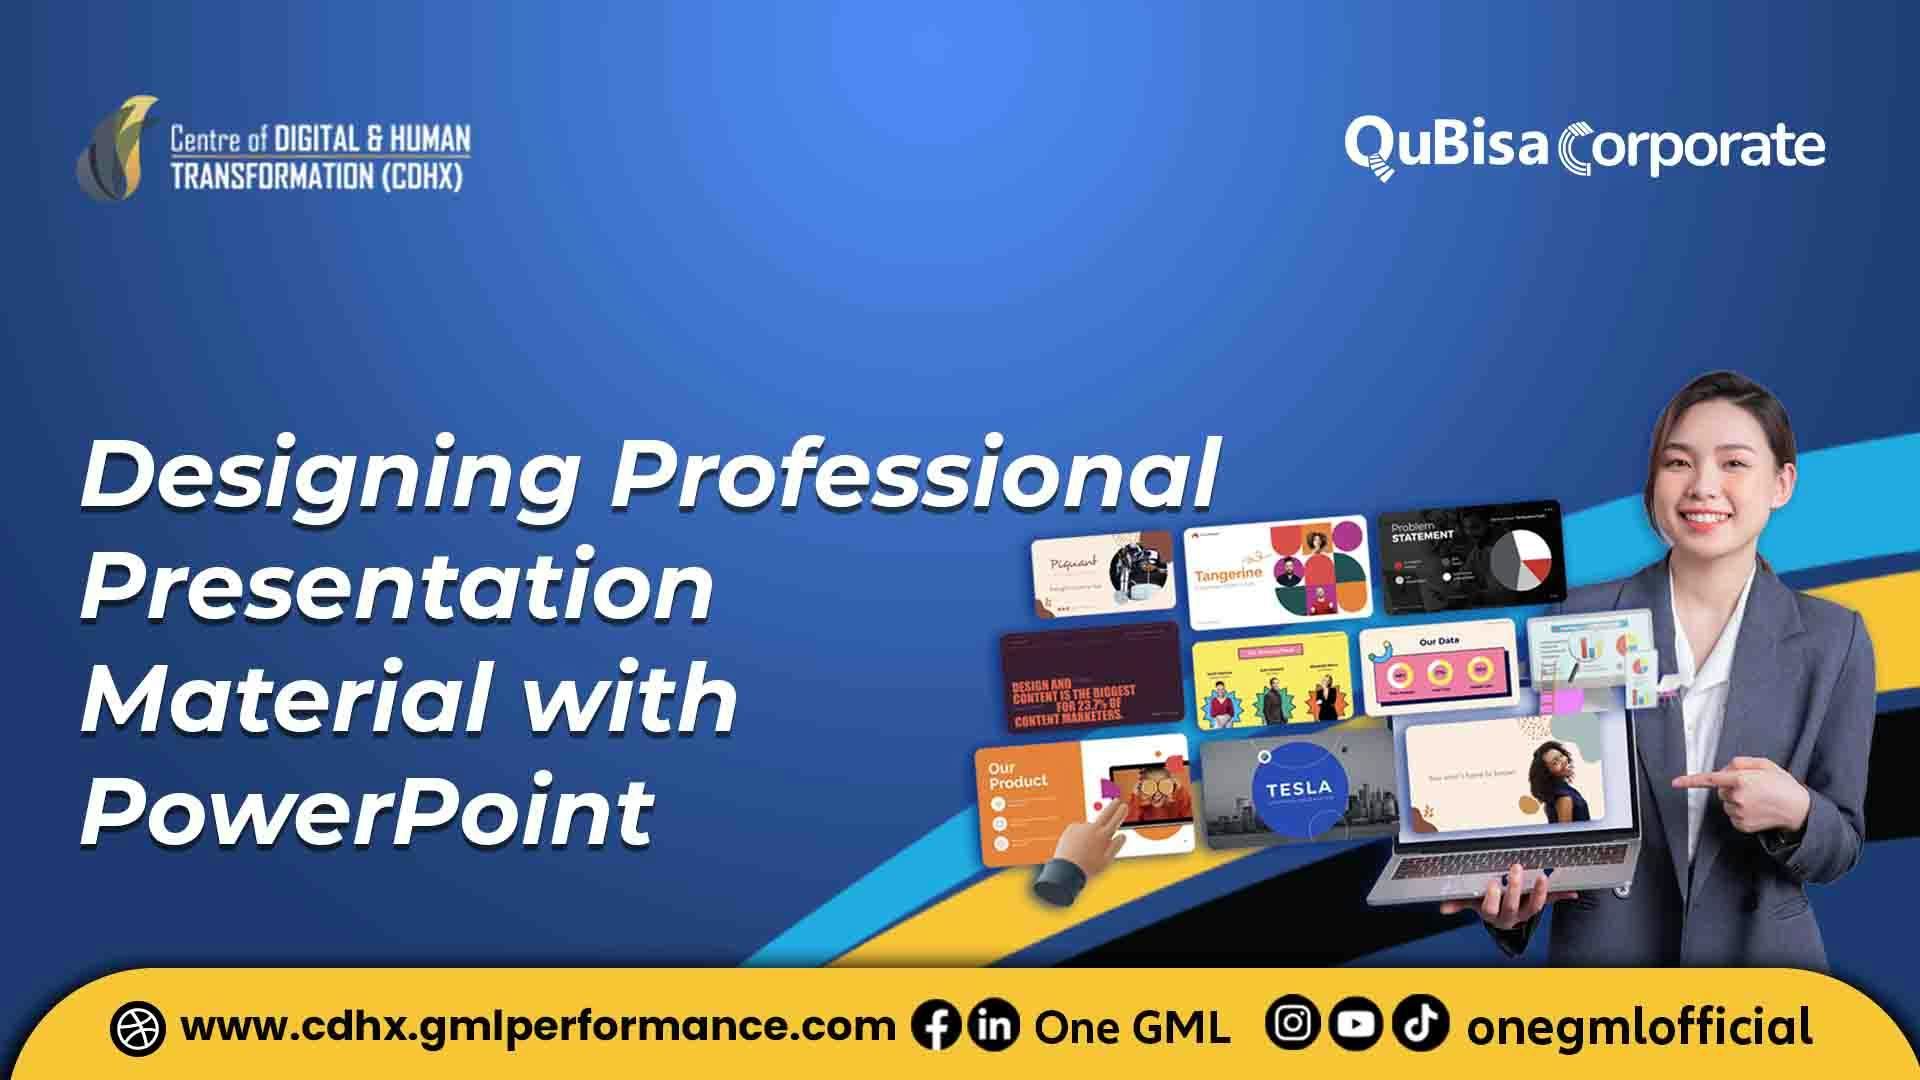 Designing Professional Presentation Material with PowerPoint.jpg